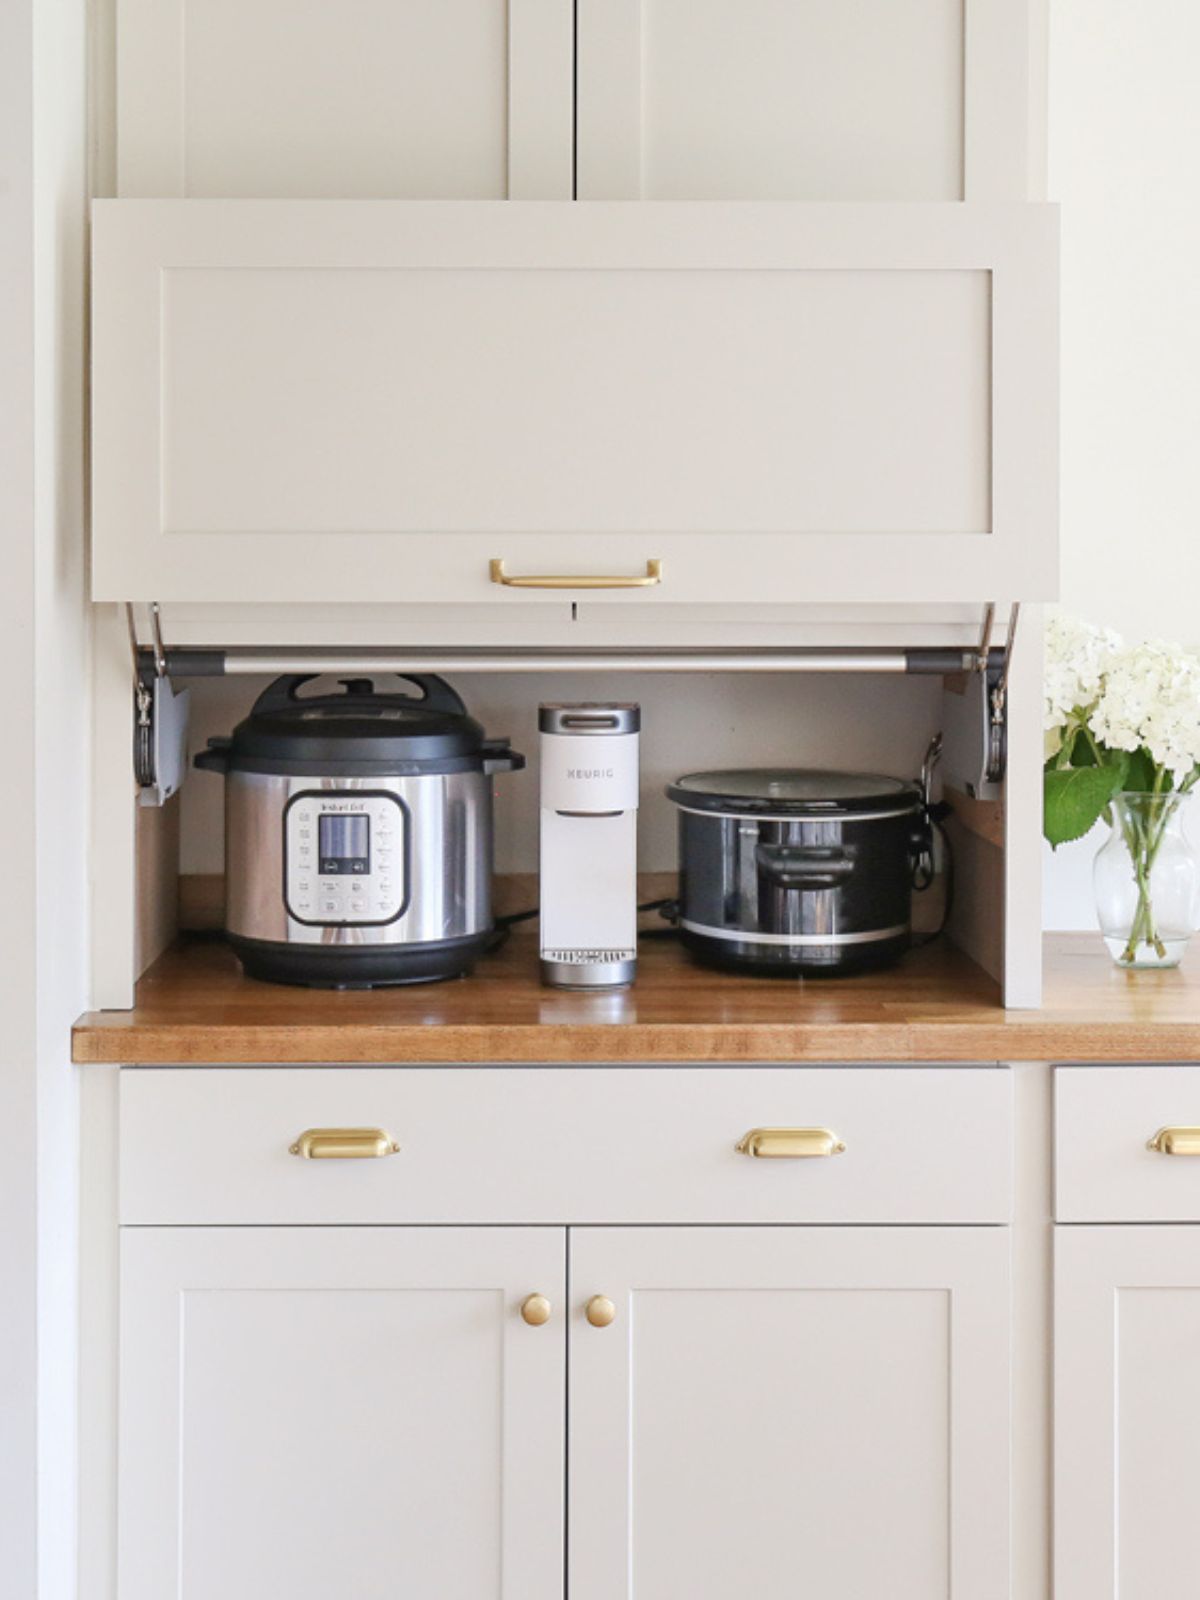 An appliance garage cabinet with a coffee maker, rice cooker, and crockpot stored inside.